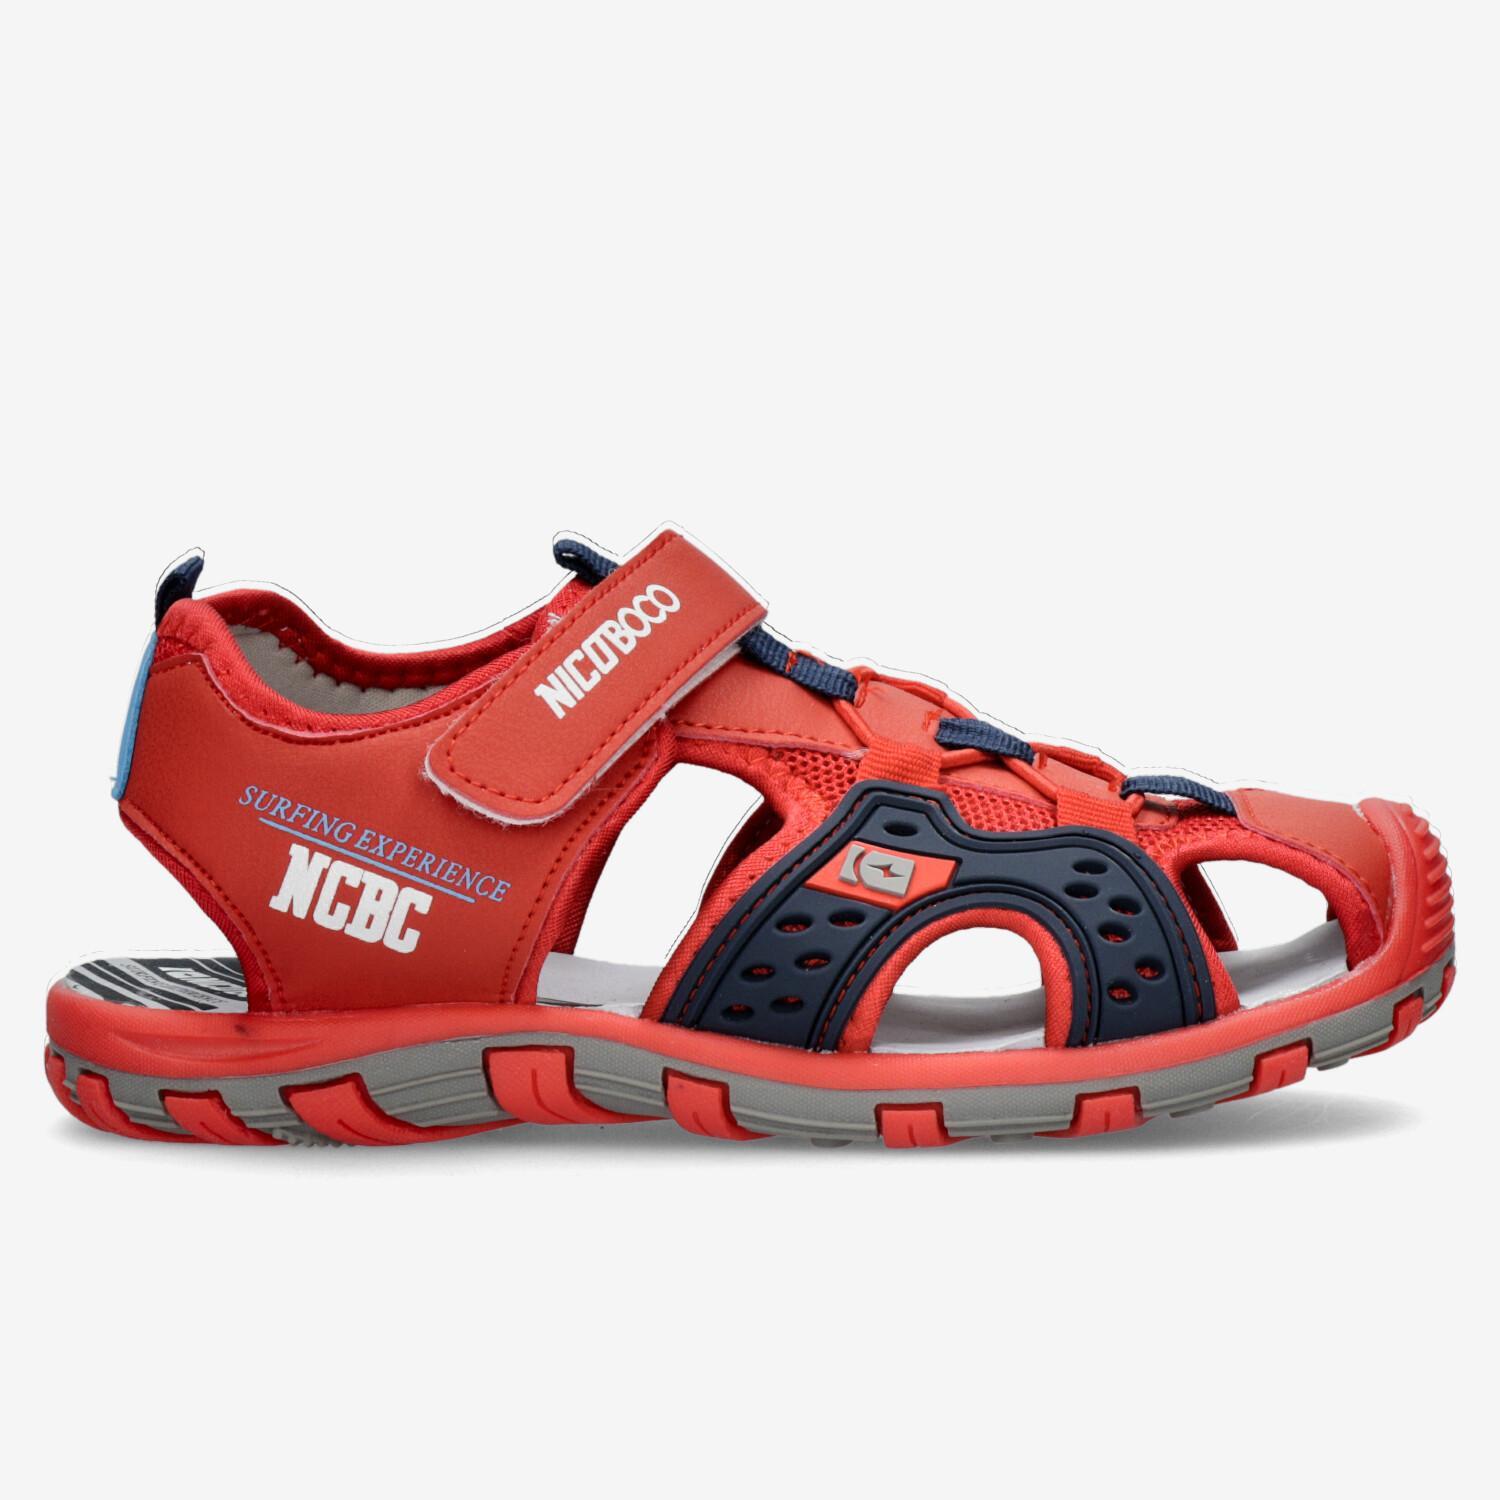 Nicoboco Toe 21 - Rouge - Sandales Fille sports taille 33